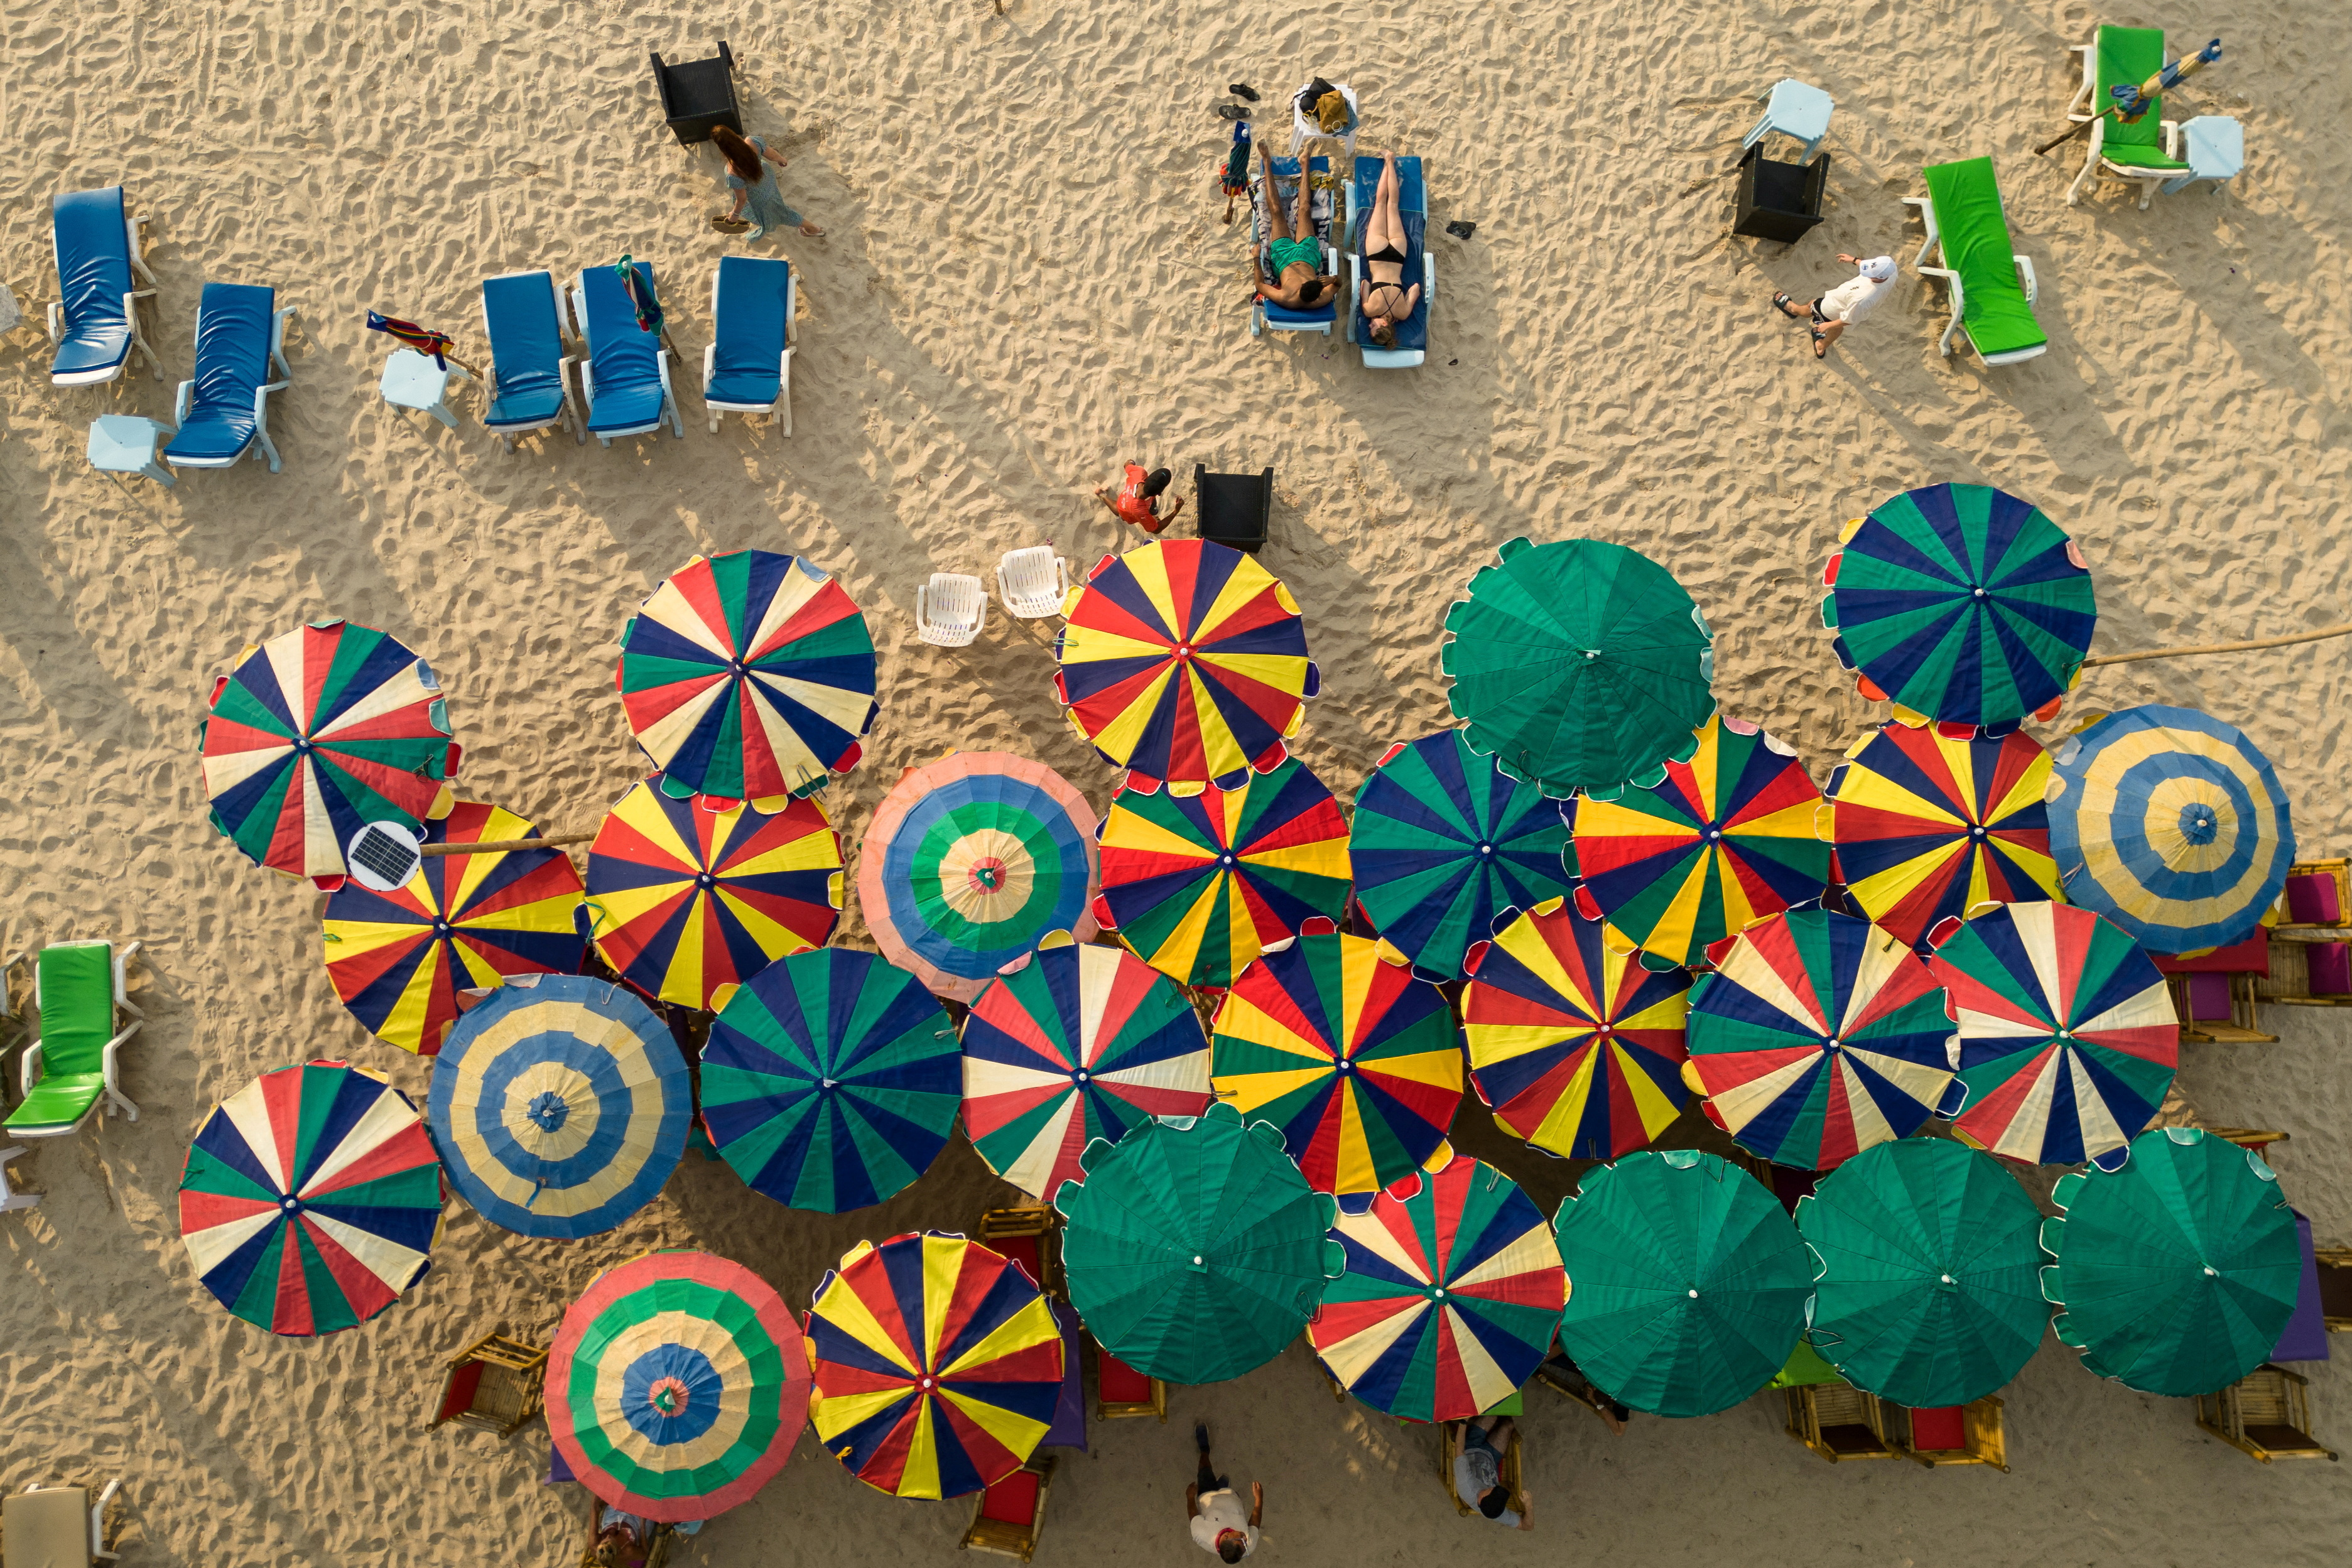 Colorful umbrellas are seen in a restaurant as tourists enjoy a beach in the island of Phuket in Thailand